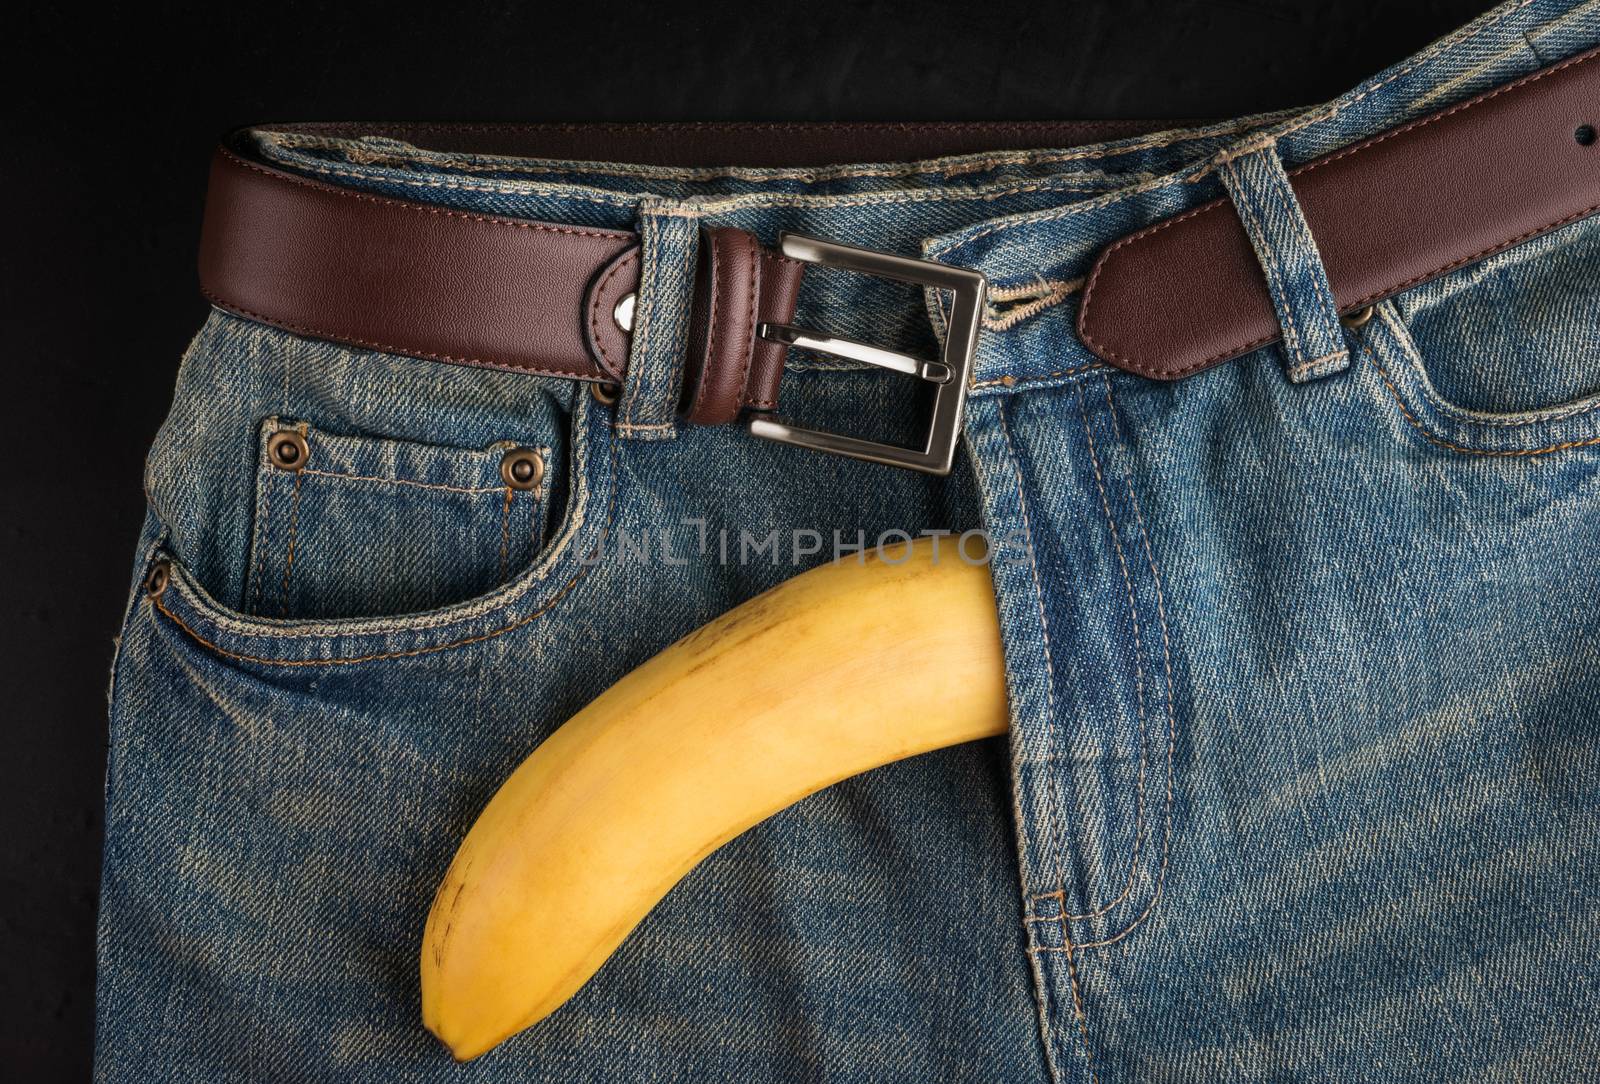 Big Banana, men's jeans and  belt, like the penis, top view, on dark background